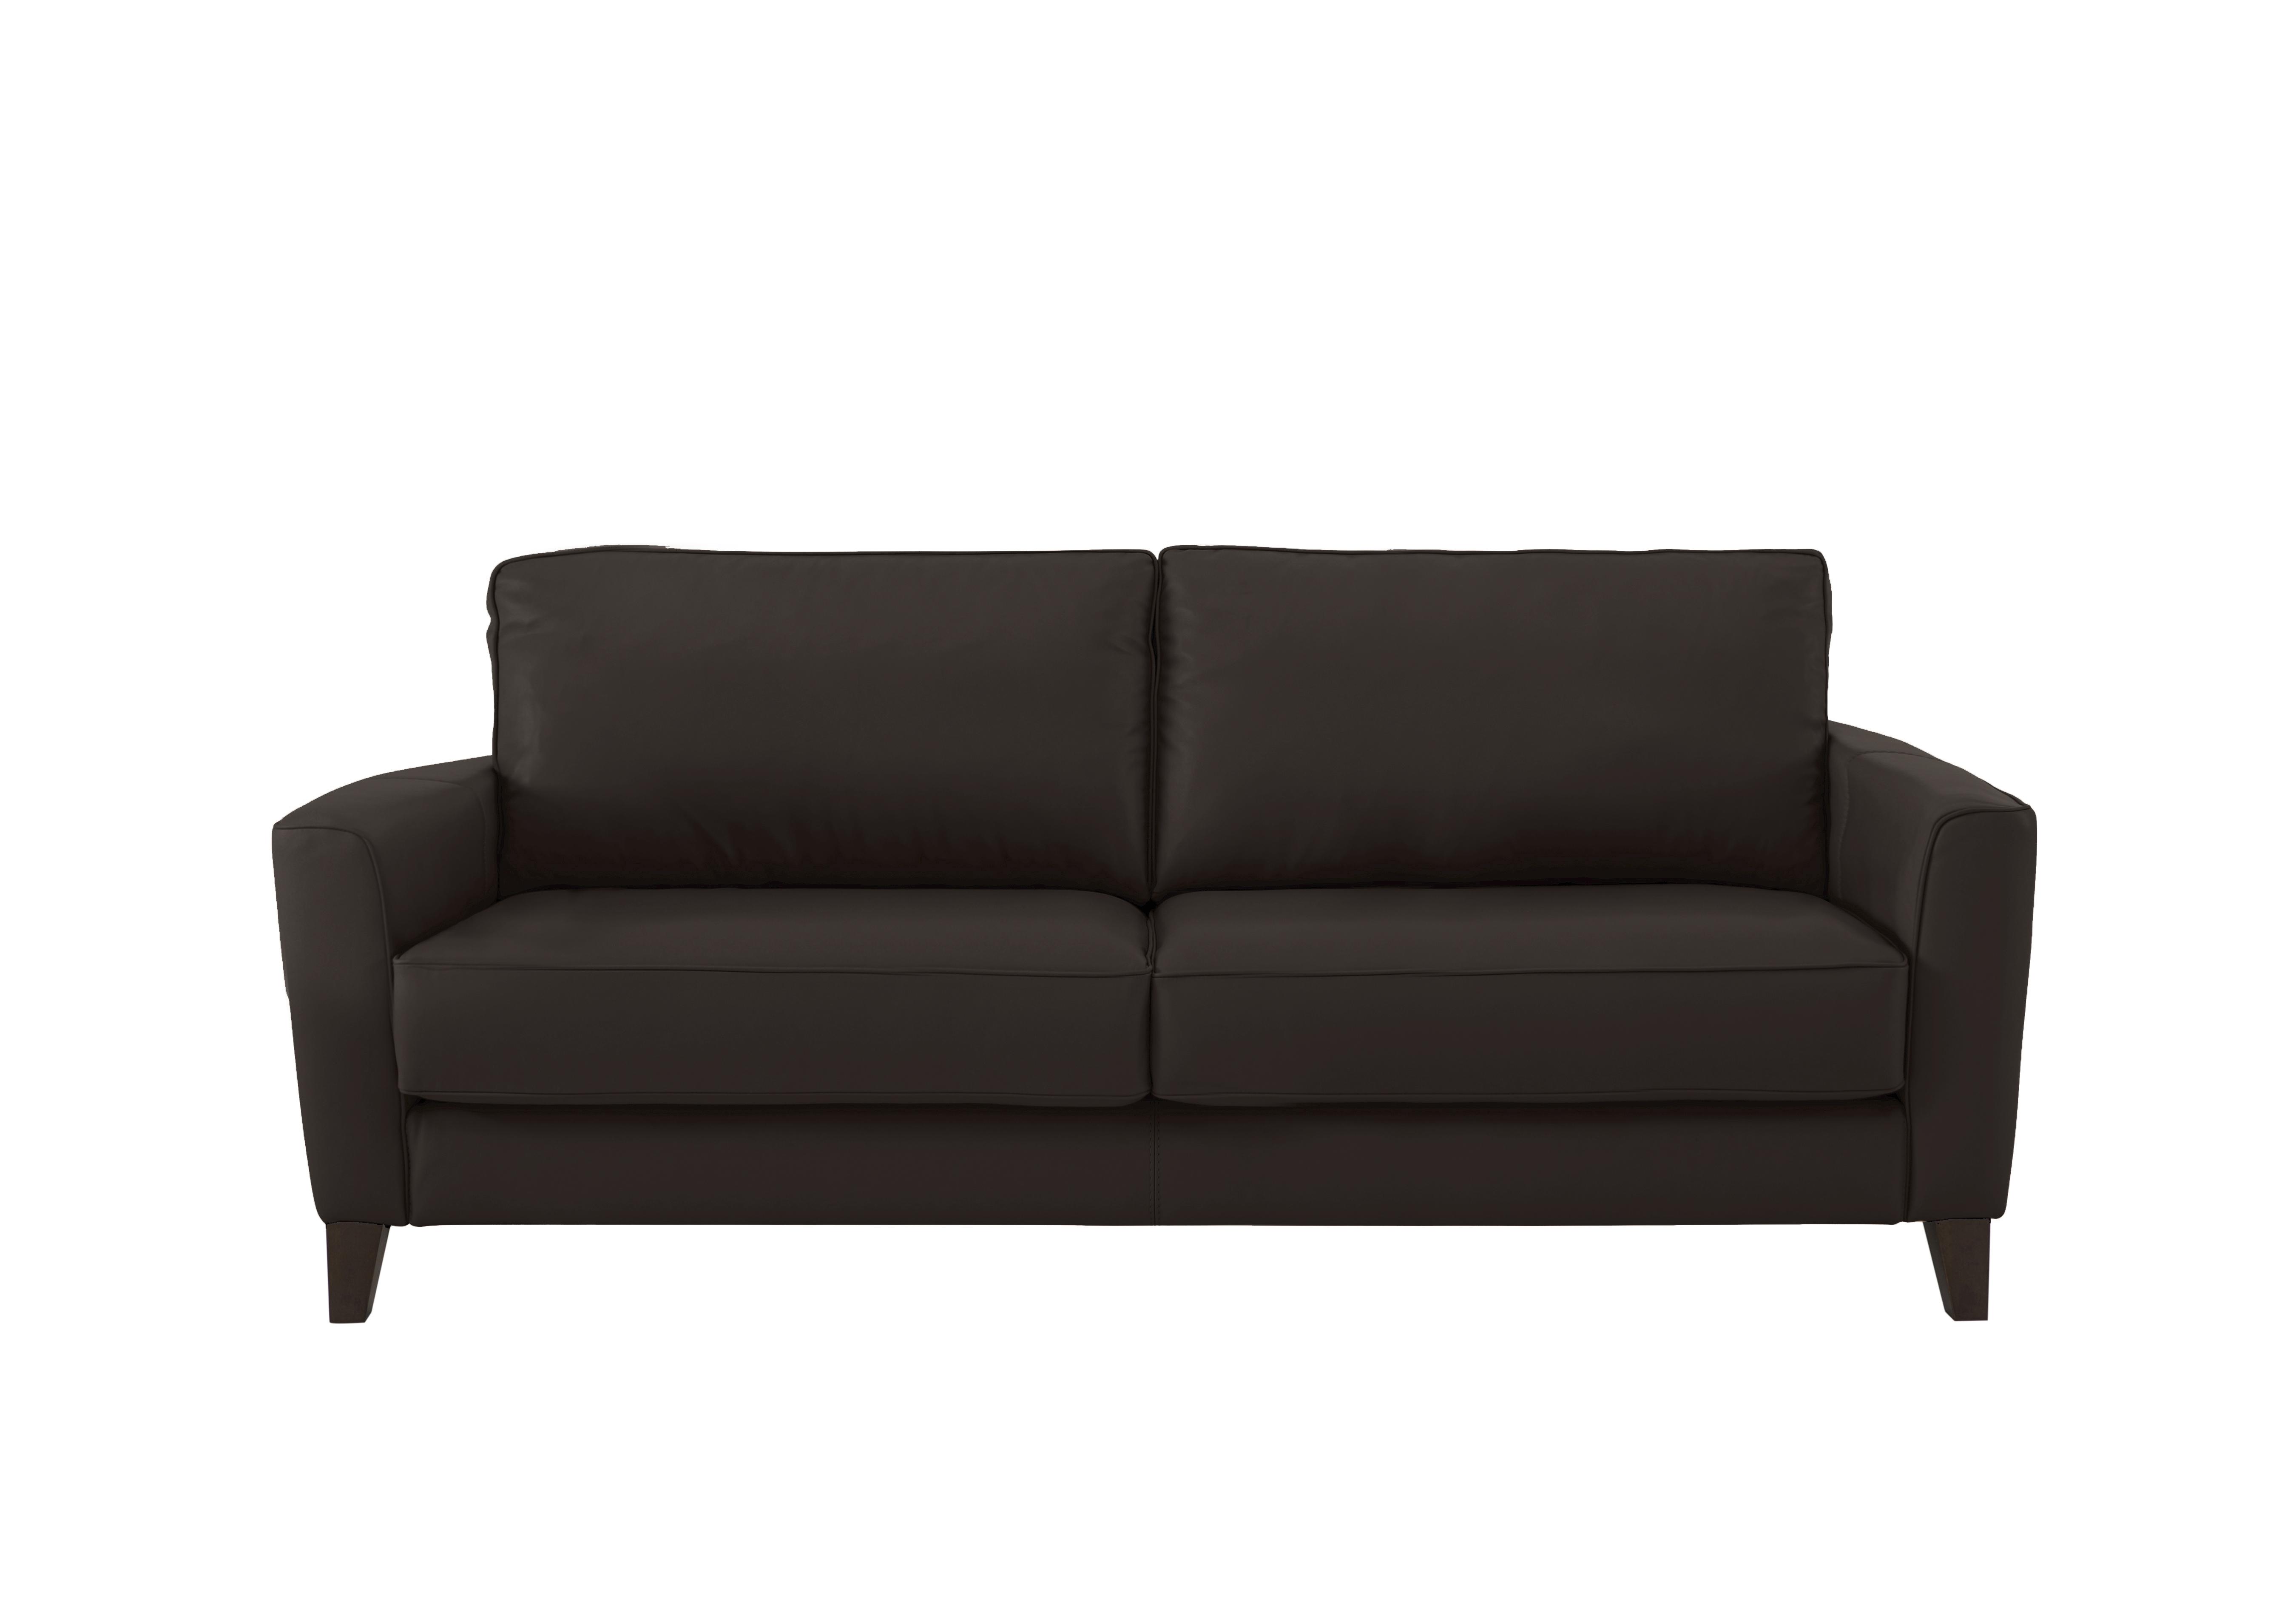 Brondby 3 Seater Leather Sofa in Bv-1748 Dark Chocolate on Furniture Village